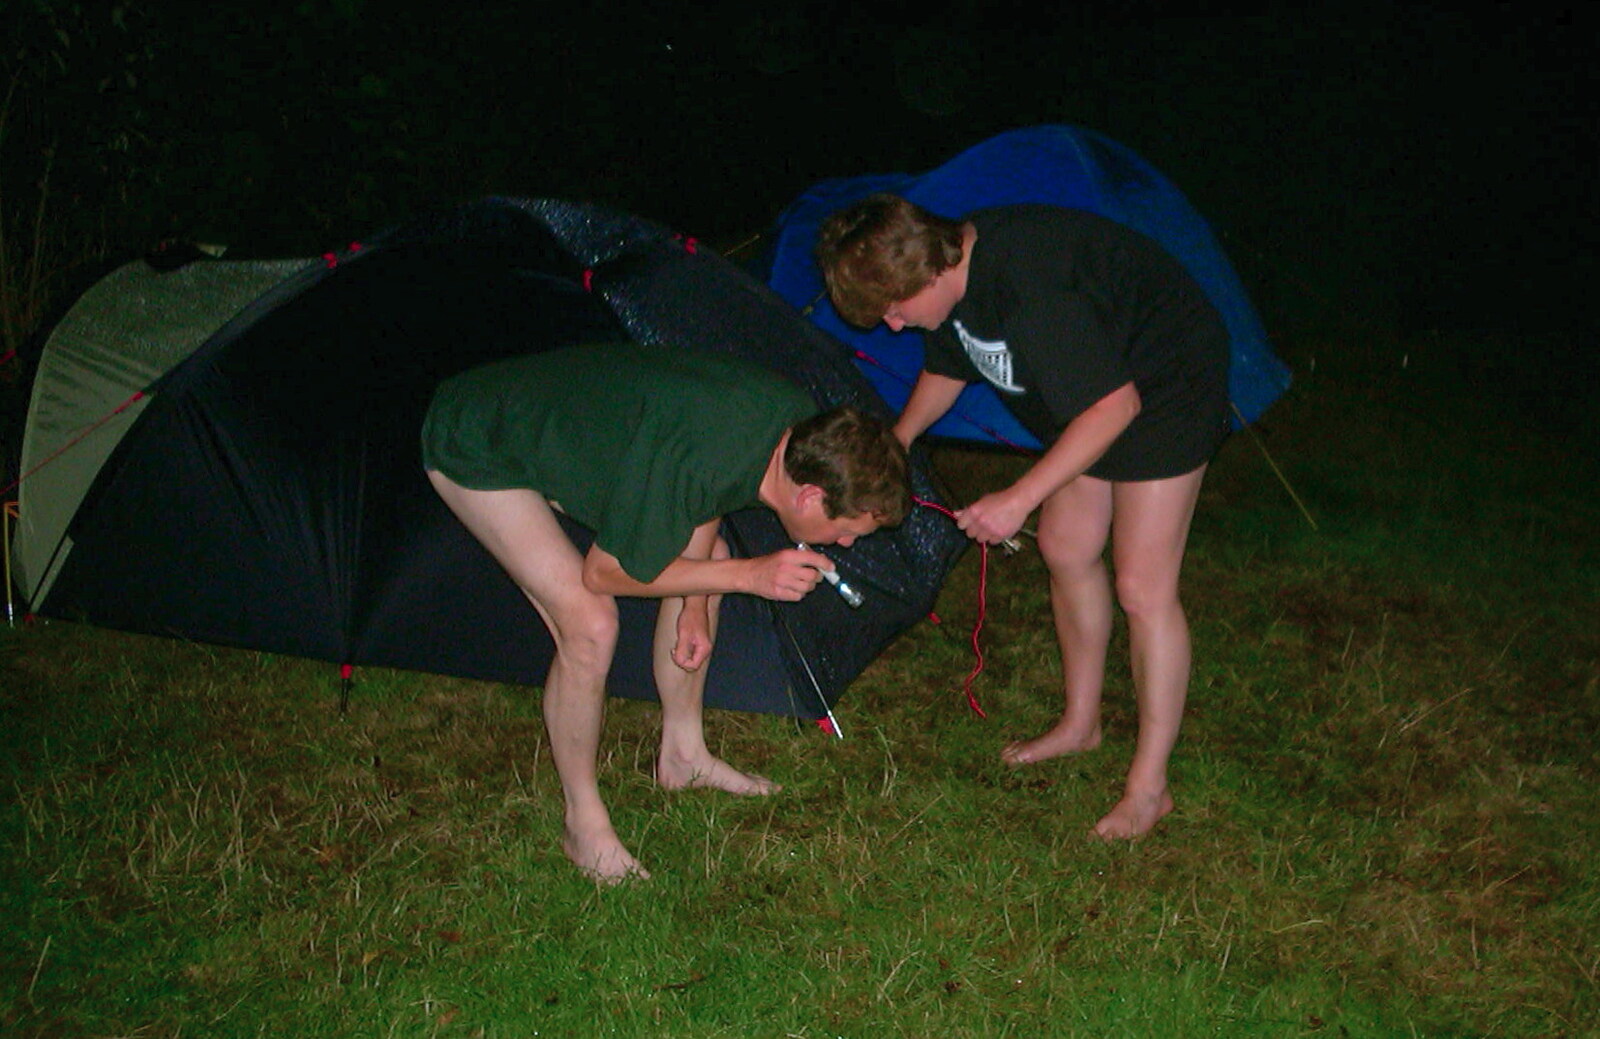 A BSCC Splinter Group Camping Weekend, Theberton, Suffolk - 11th August 2002: Apple and Pippa have lost something important